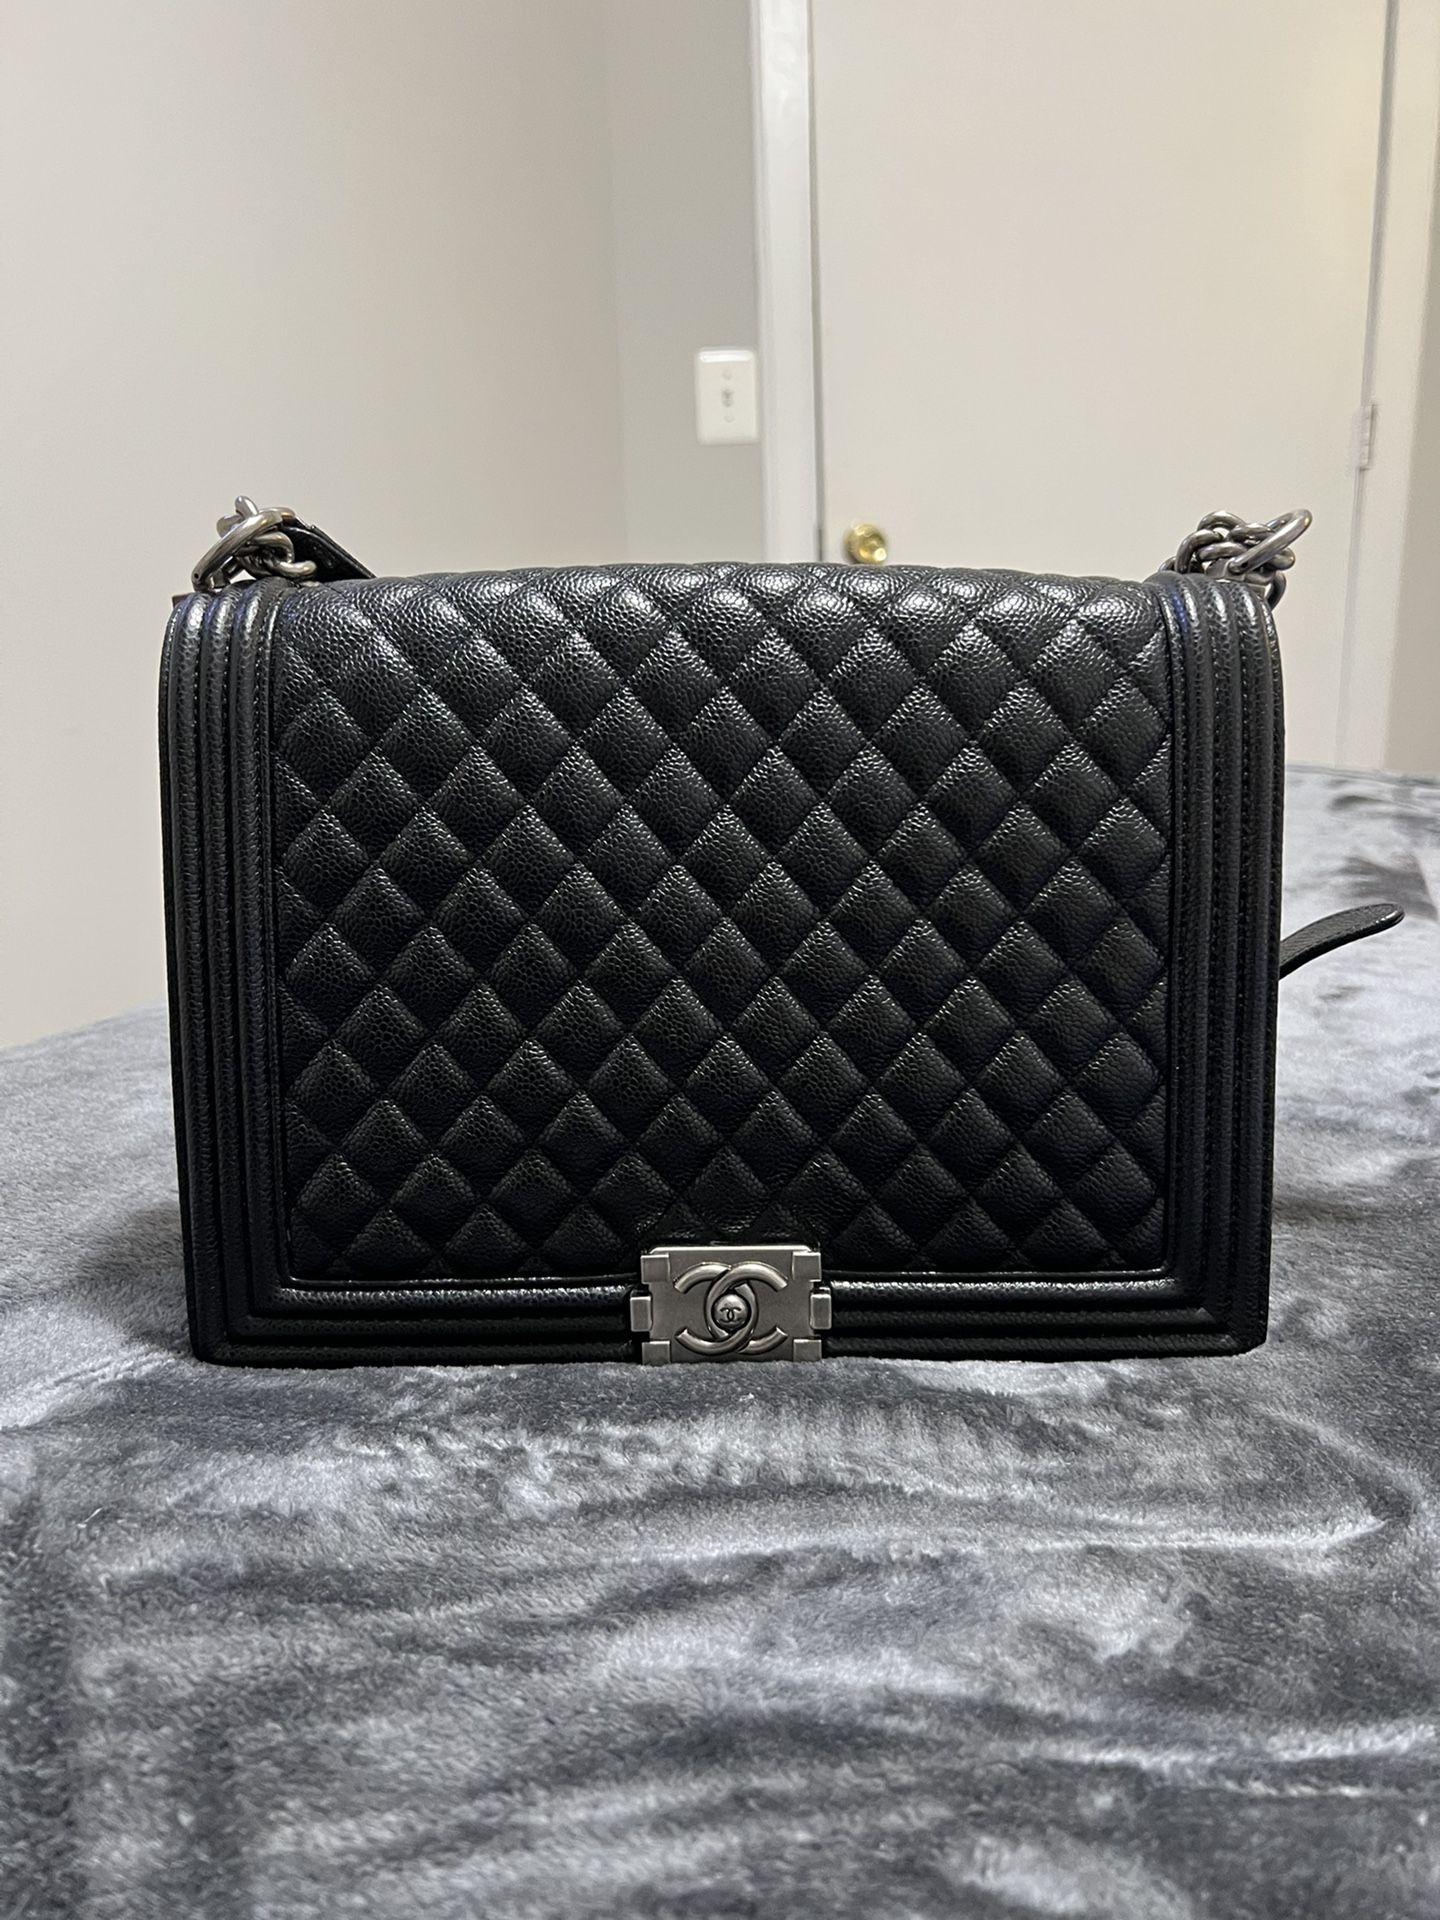 Chanel Bag for Sale in Washington, DC - OfferUp